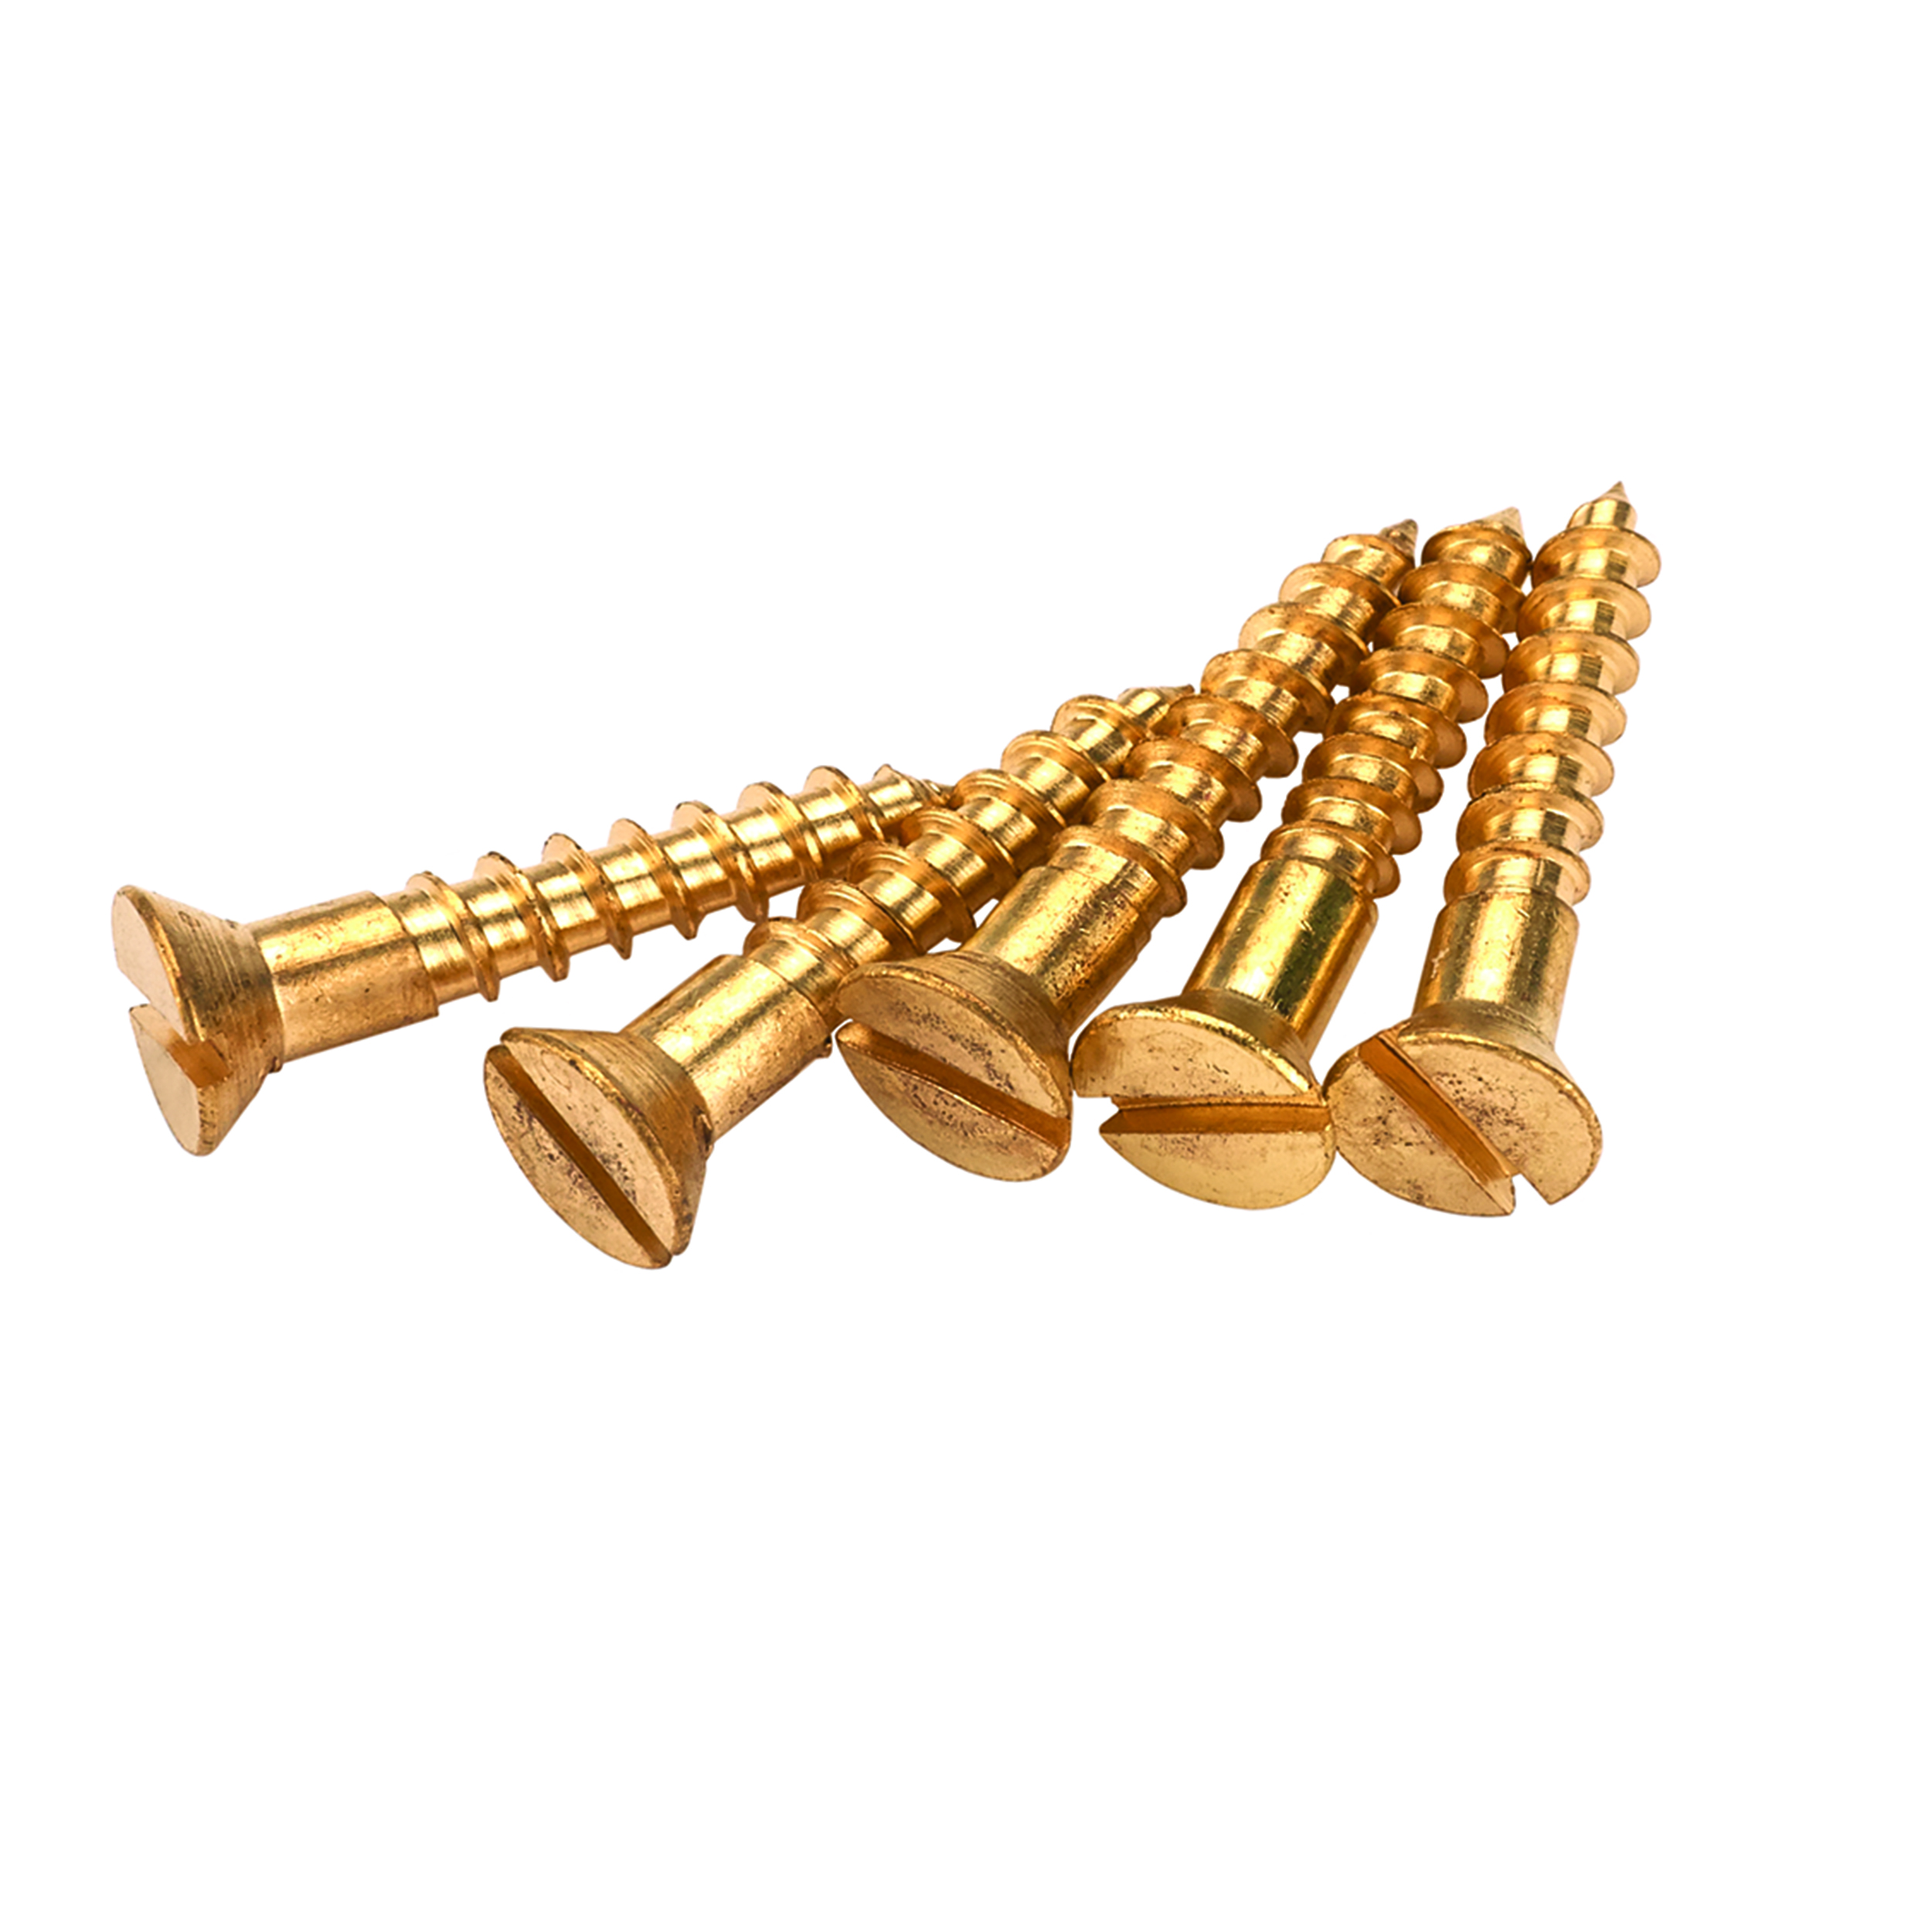 Solid Brass Screws #6 X 5/8" Slotted 25-piece